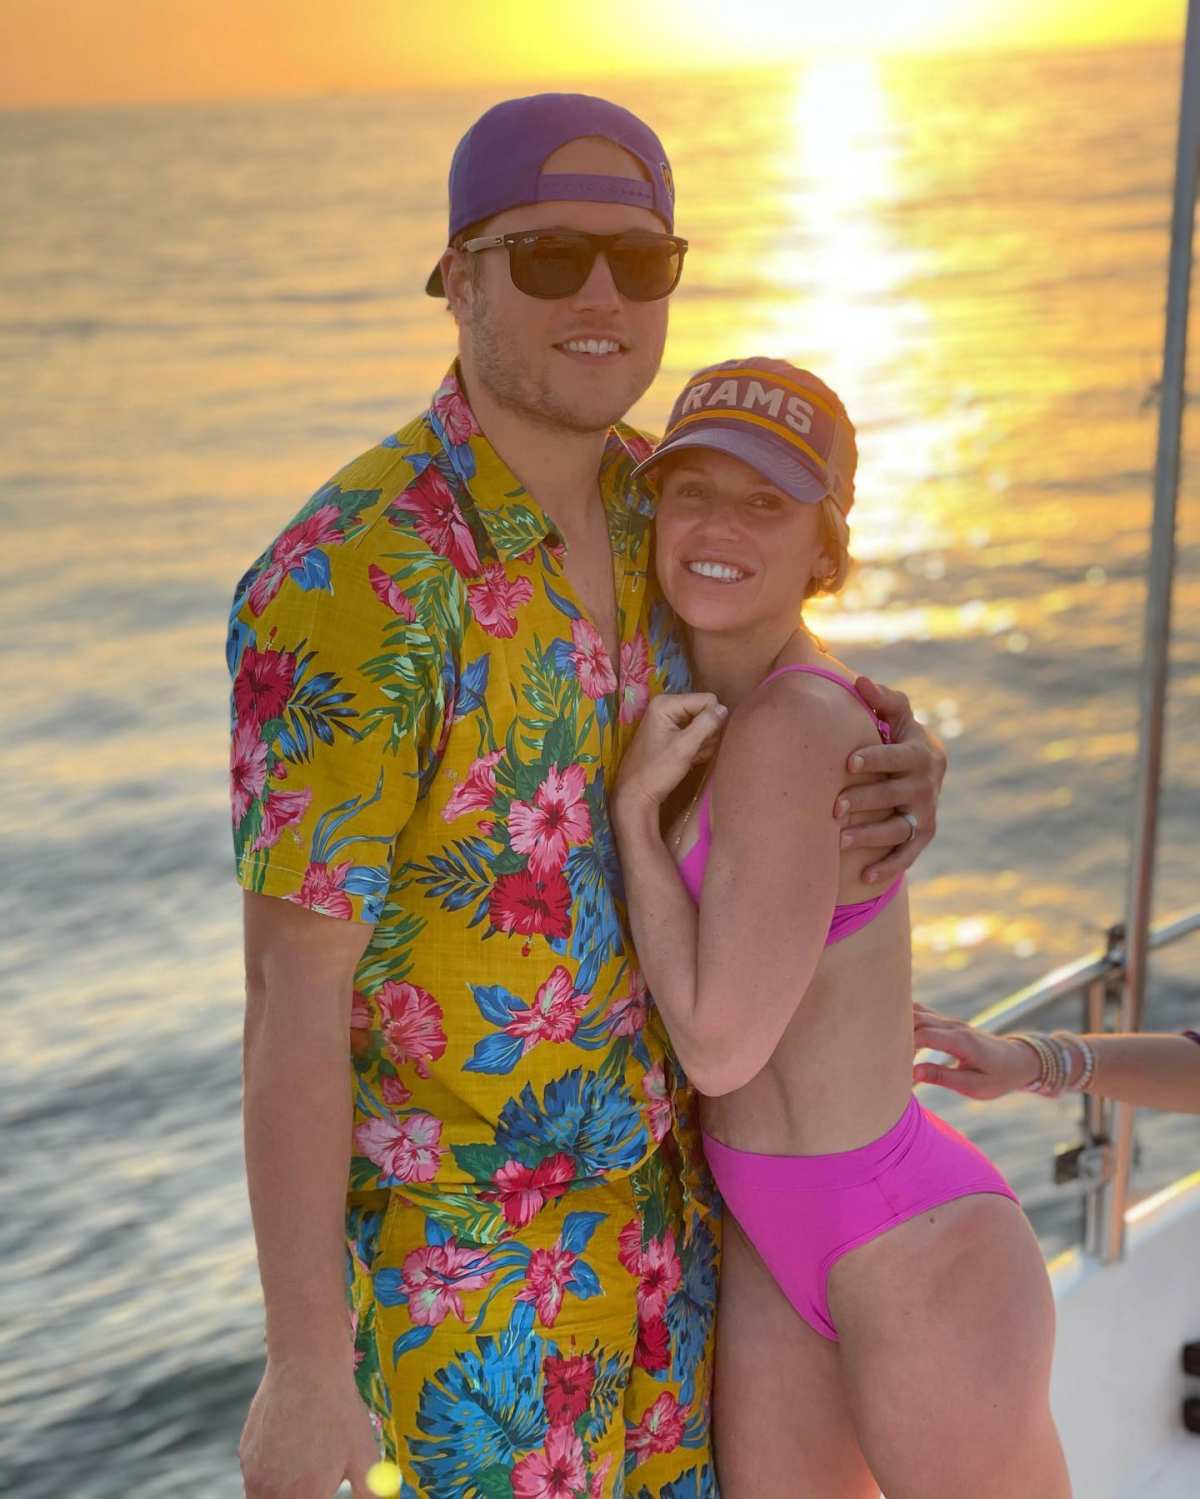 Rams Quarterback Matthew Stafford & Wife Kelly Spotted on Pre-Super Bowl  Date in L.A.: Photo 4700609, Kelly Stafford, Matthew Stafford Photos